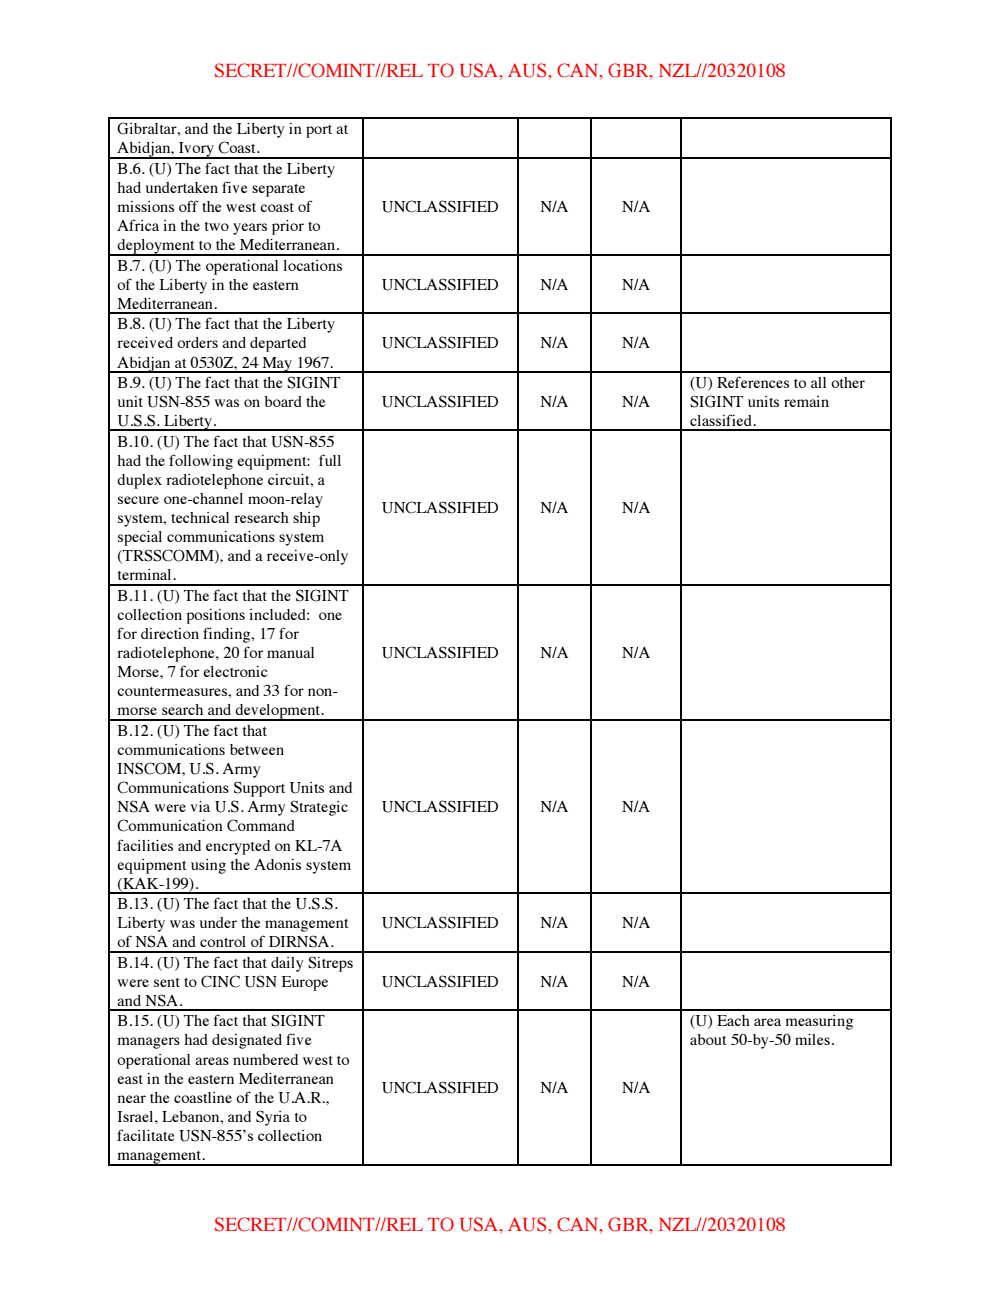 Page 5 from NSA’s USS Liberty Incident Classification Guide